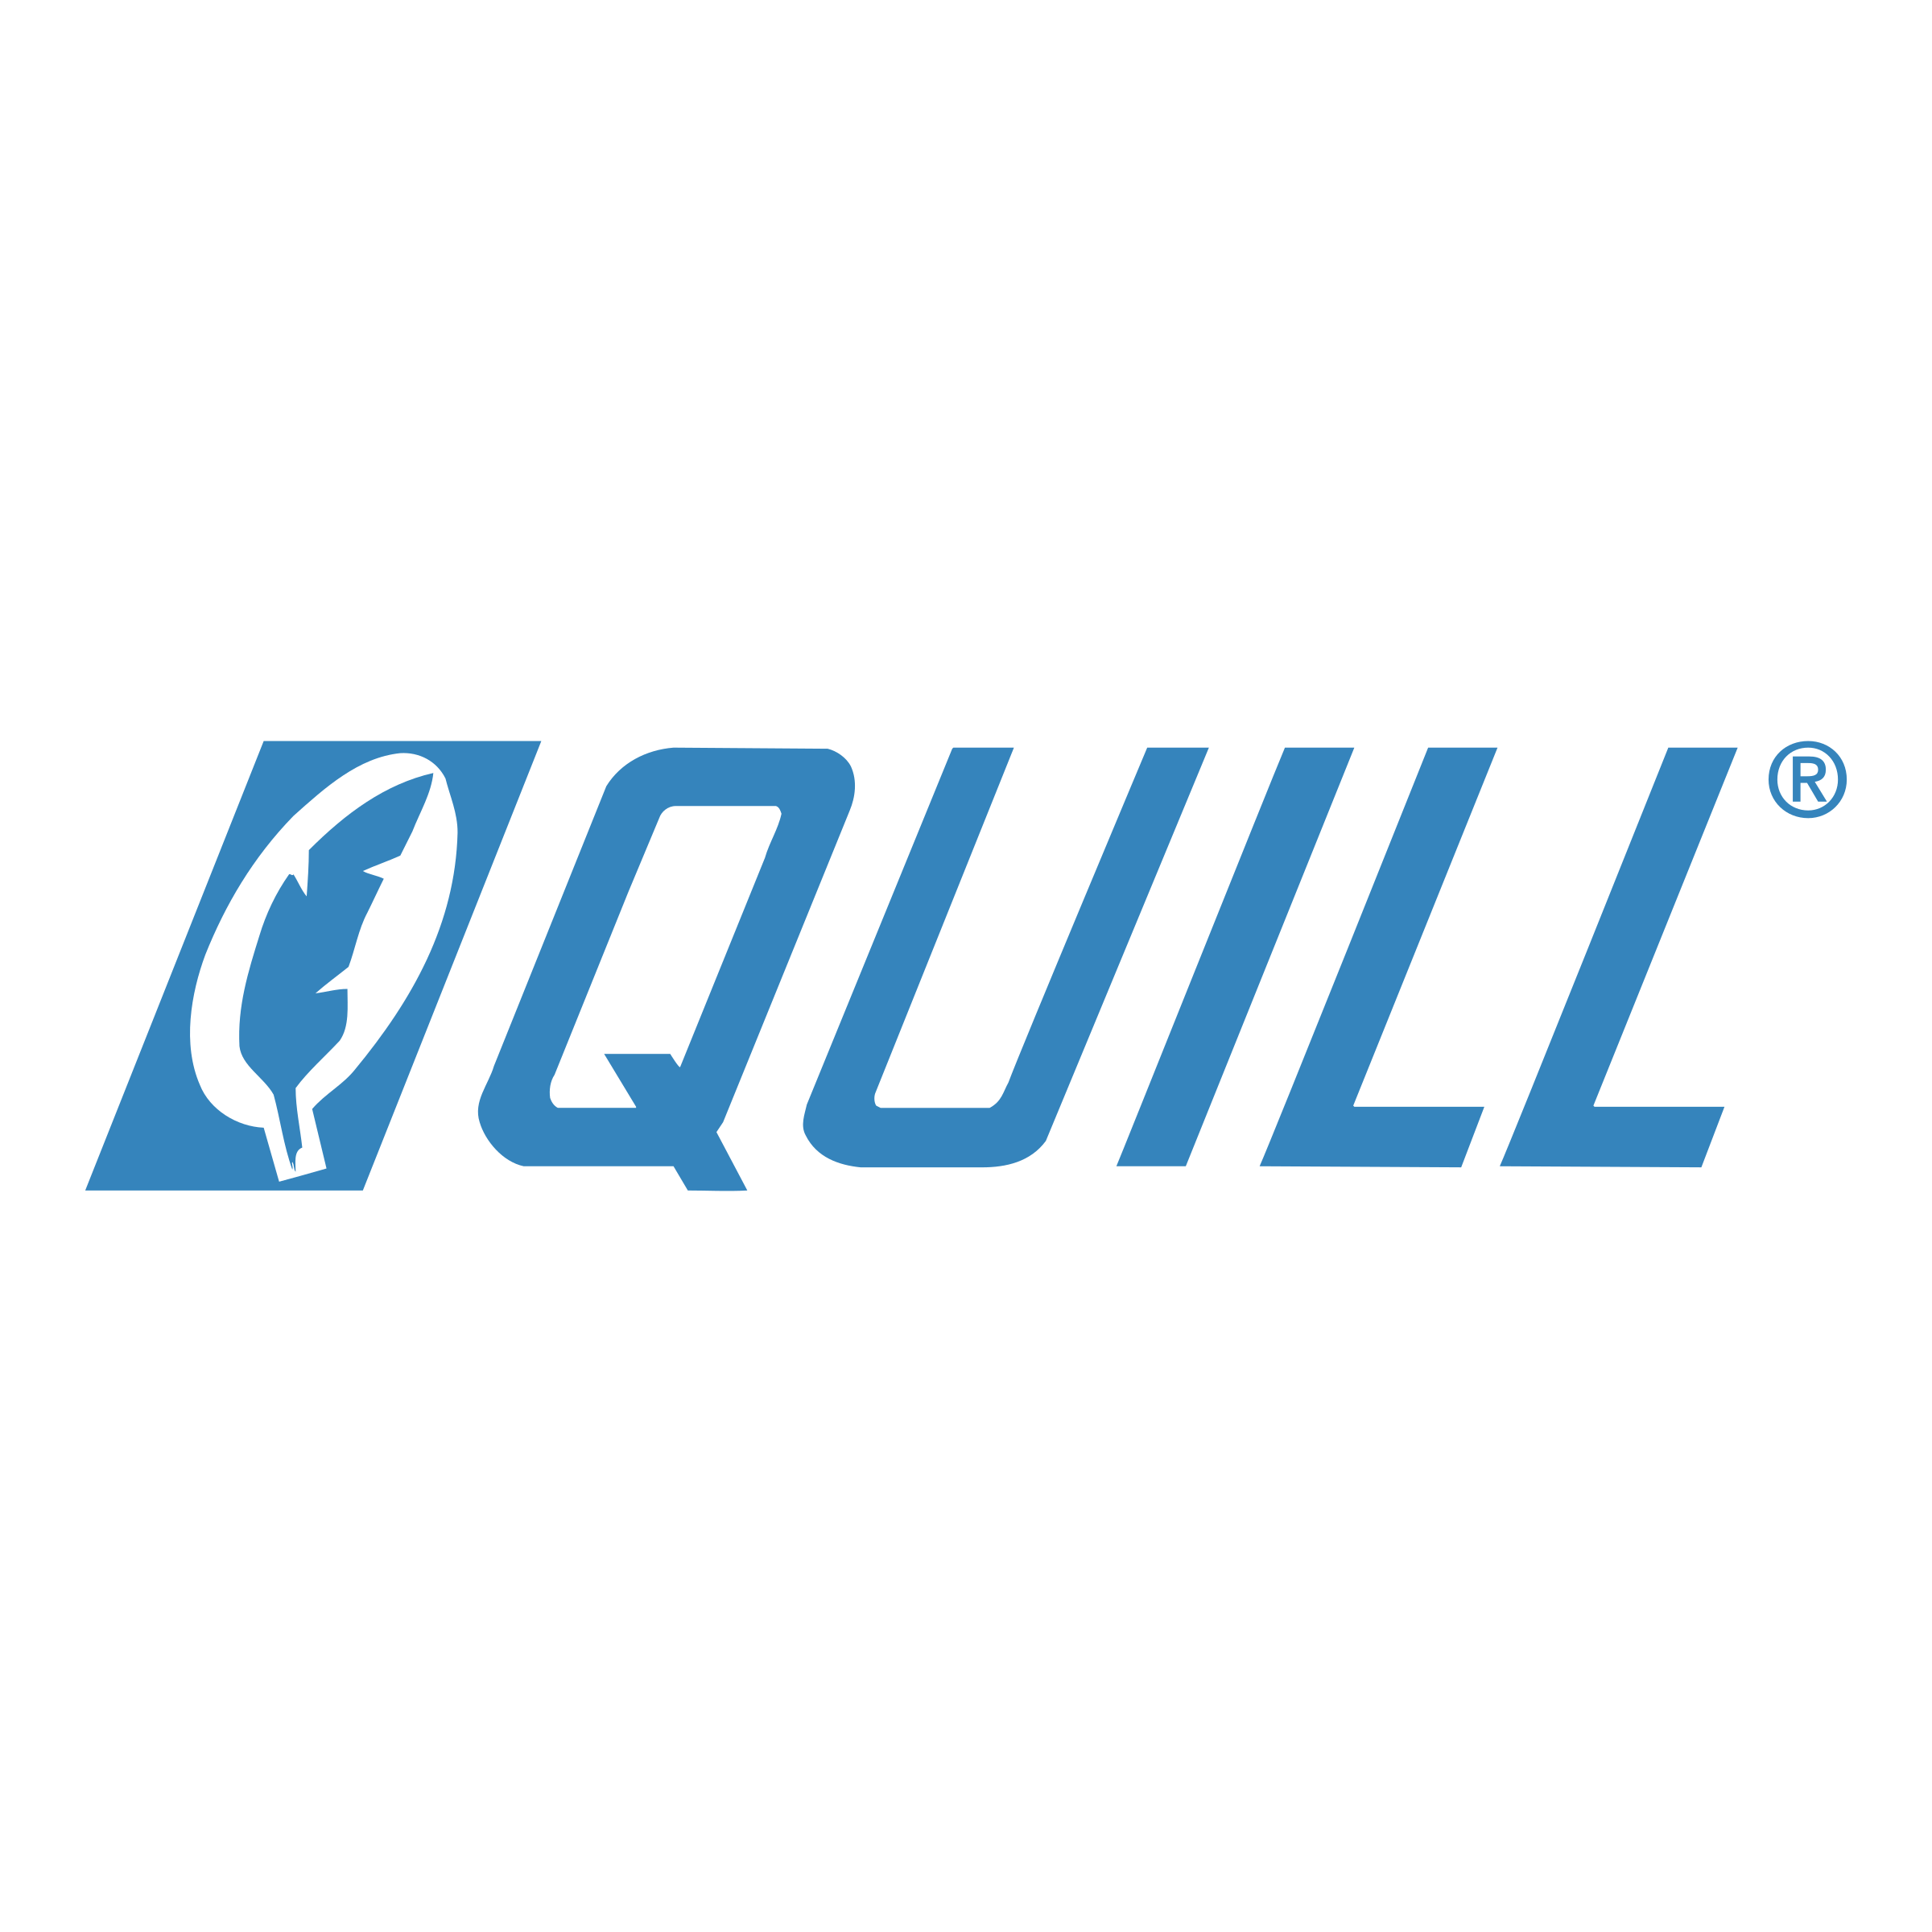 Quill Logo - Quill Logo PNG Transparent & SVG Vector